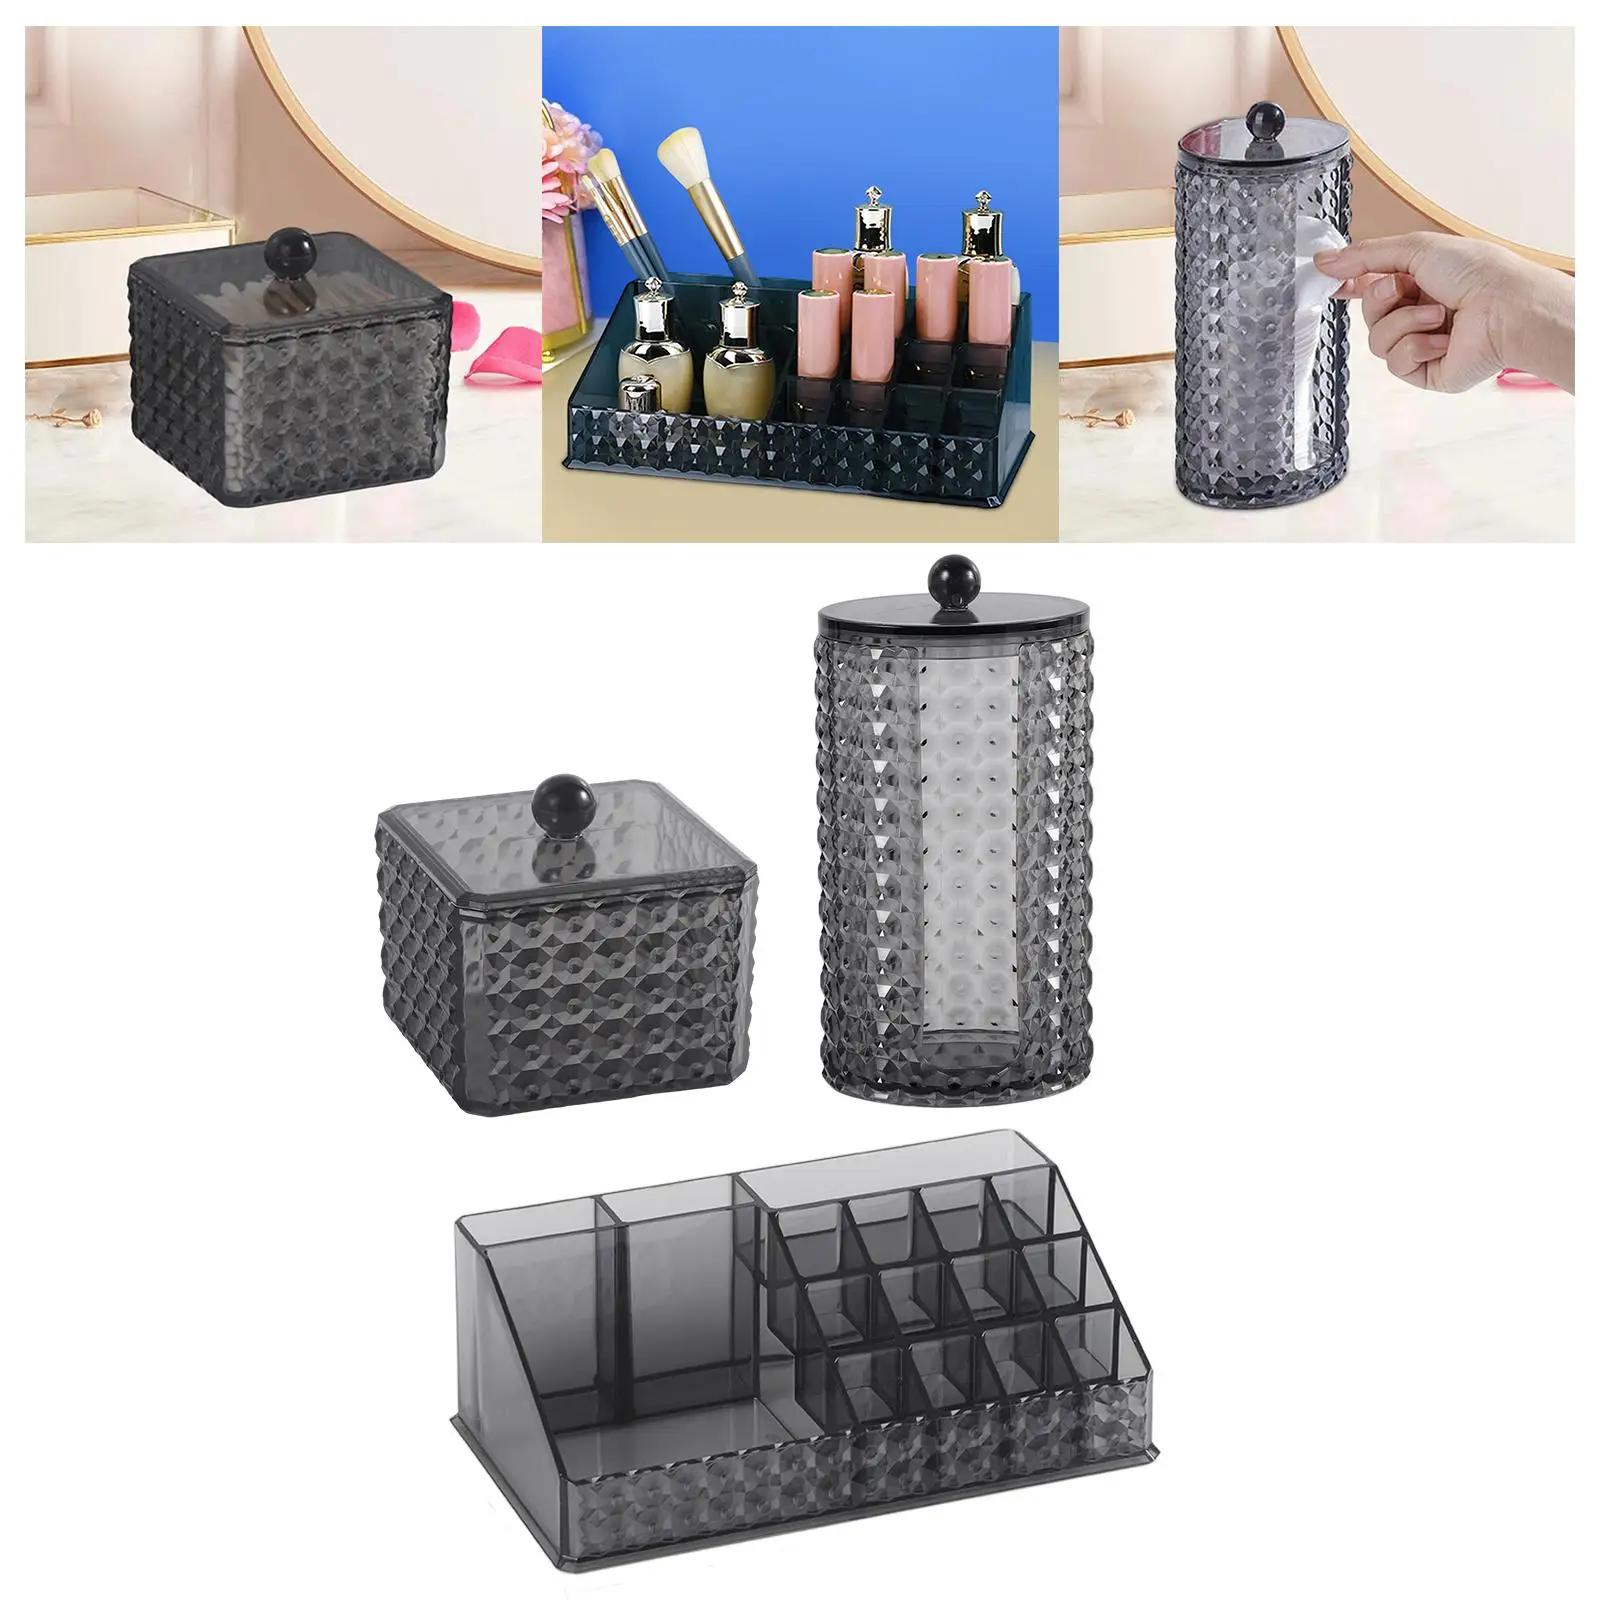 Qtip Holder Dispenser Crystal Clear Storage Box Acrylic Makeup Cotton Pad Cotton Ball Holder for Jewelry Vanity Countertop